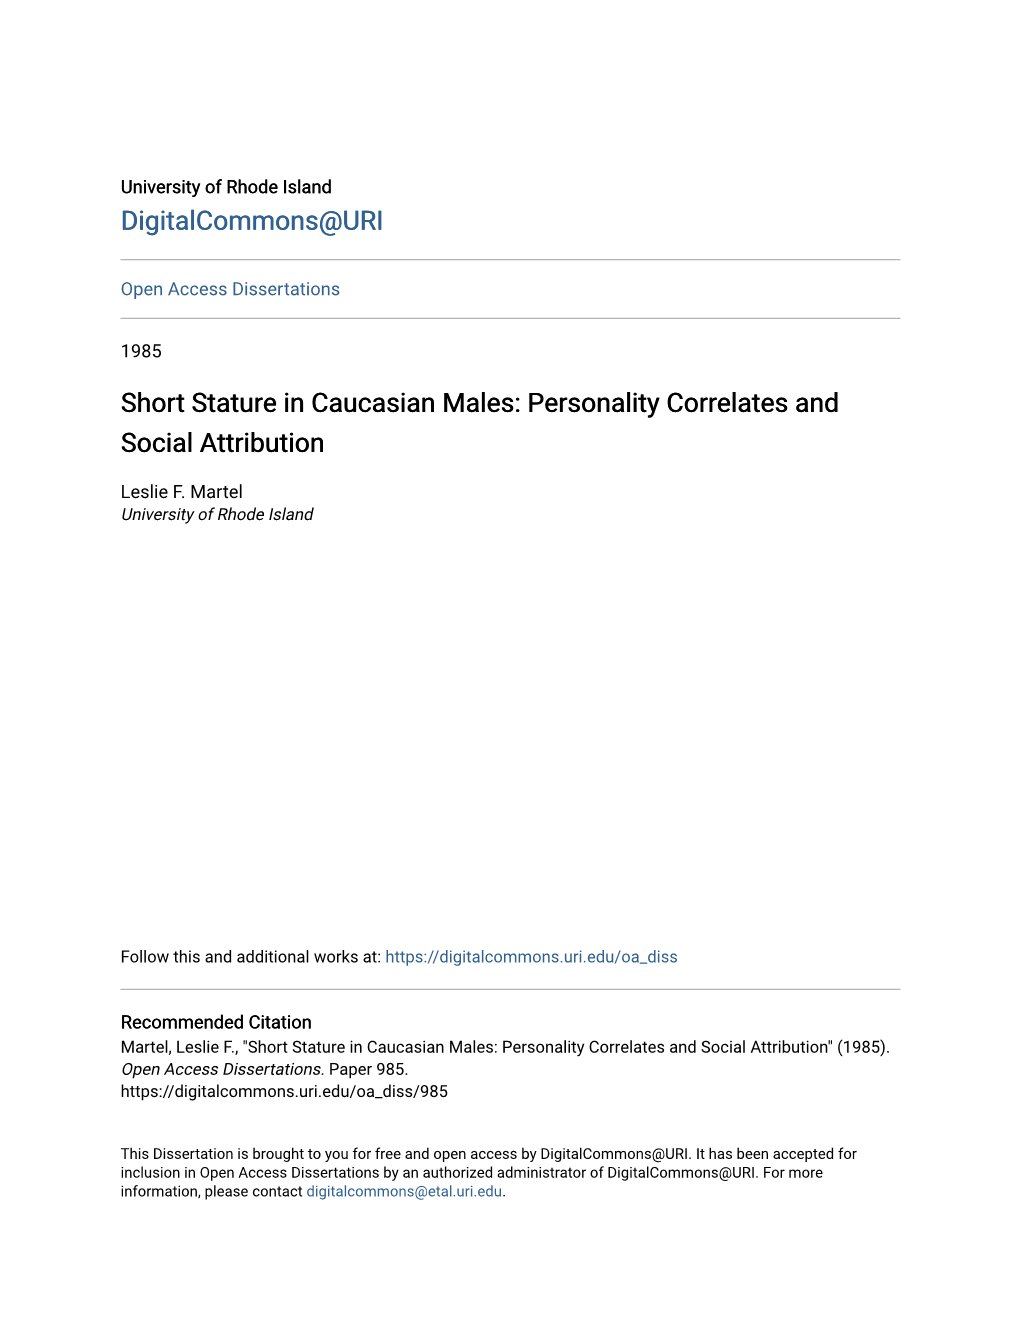 Short Stature in Caucasian Males: Personality Correlates and Social Attribution